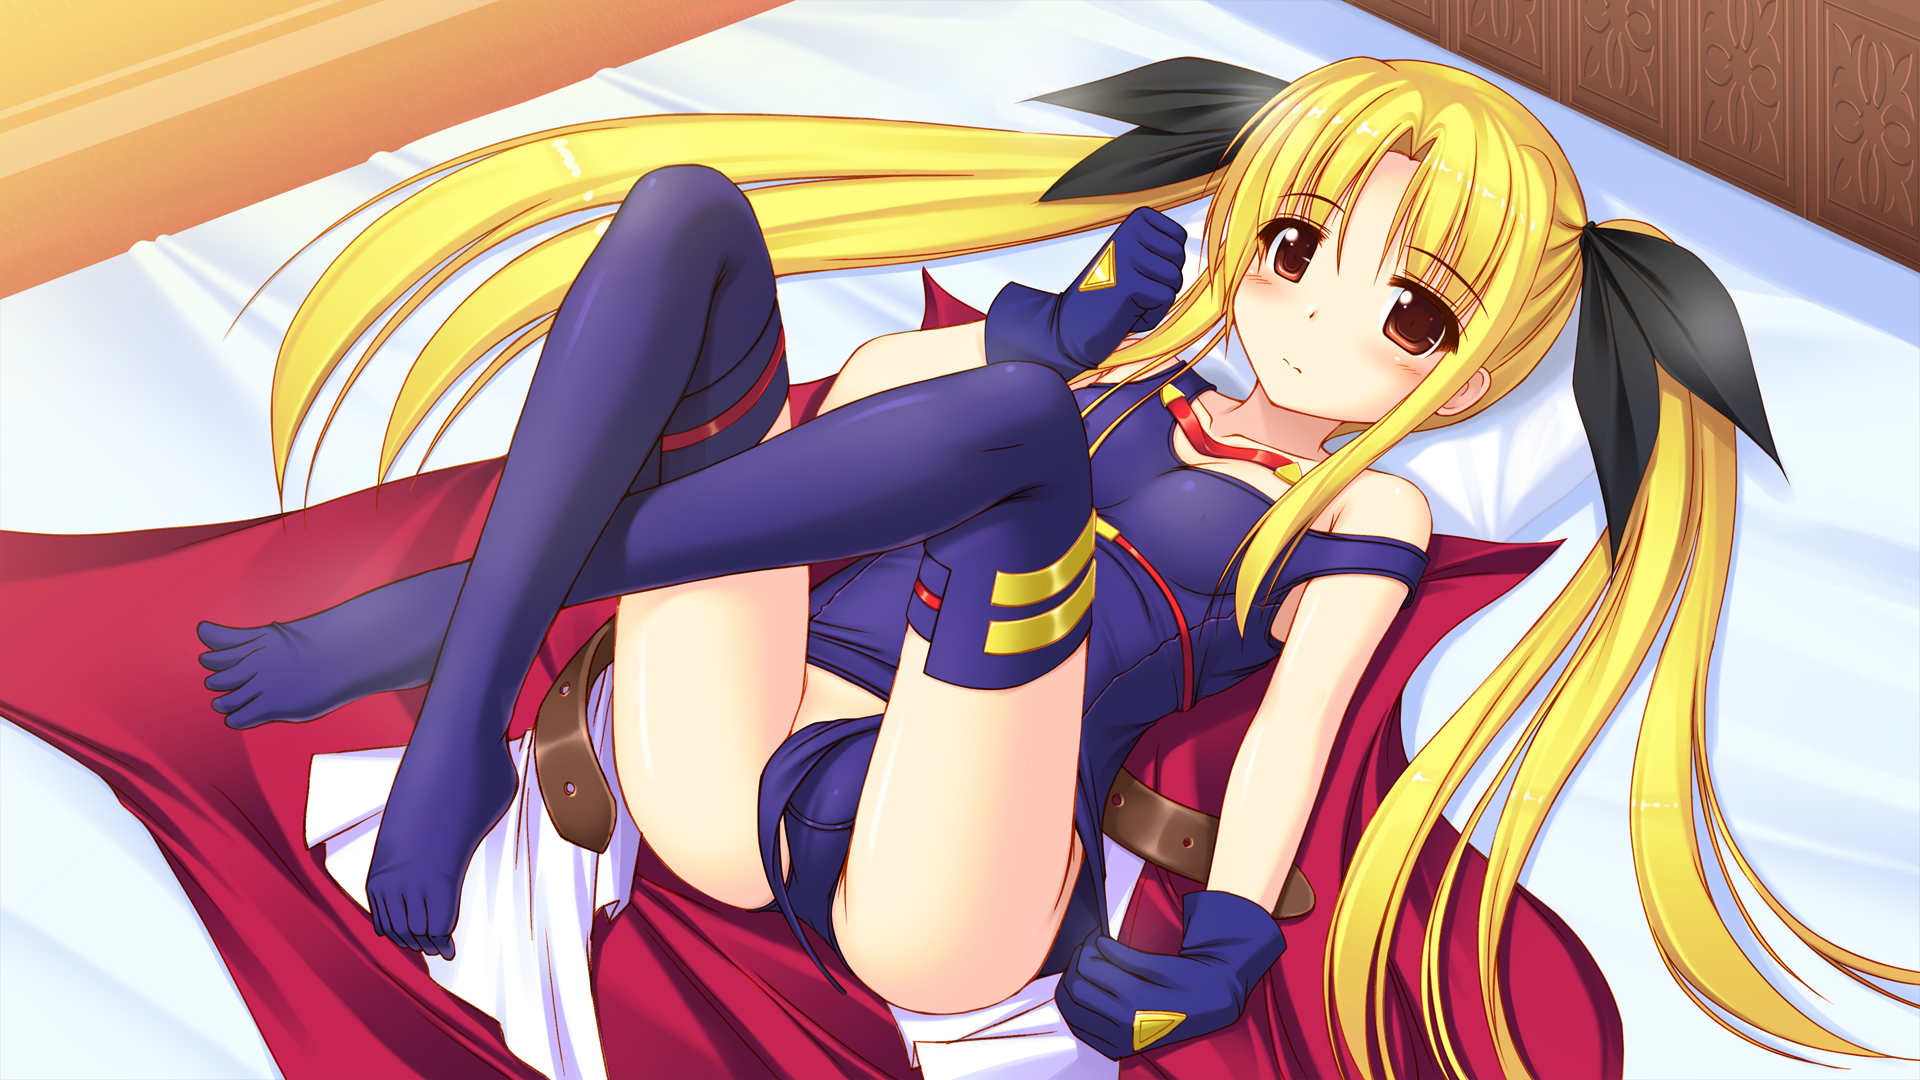 Artwork Anime Girls In Bed Blonde Twintails Brown Eyes Thigh Highs Mahou Shoujo Lyrical Nanoha Fate  1920x1080